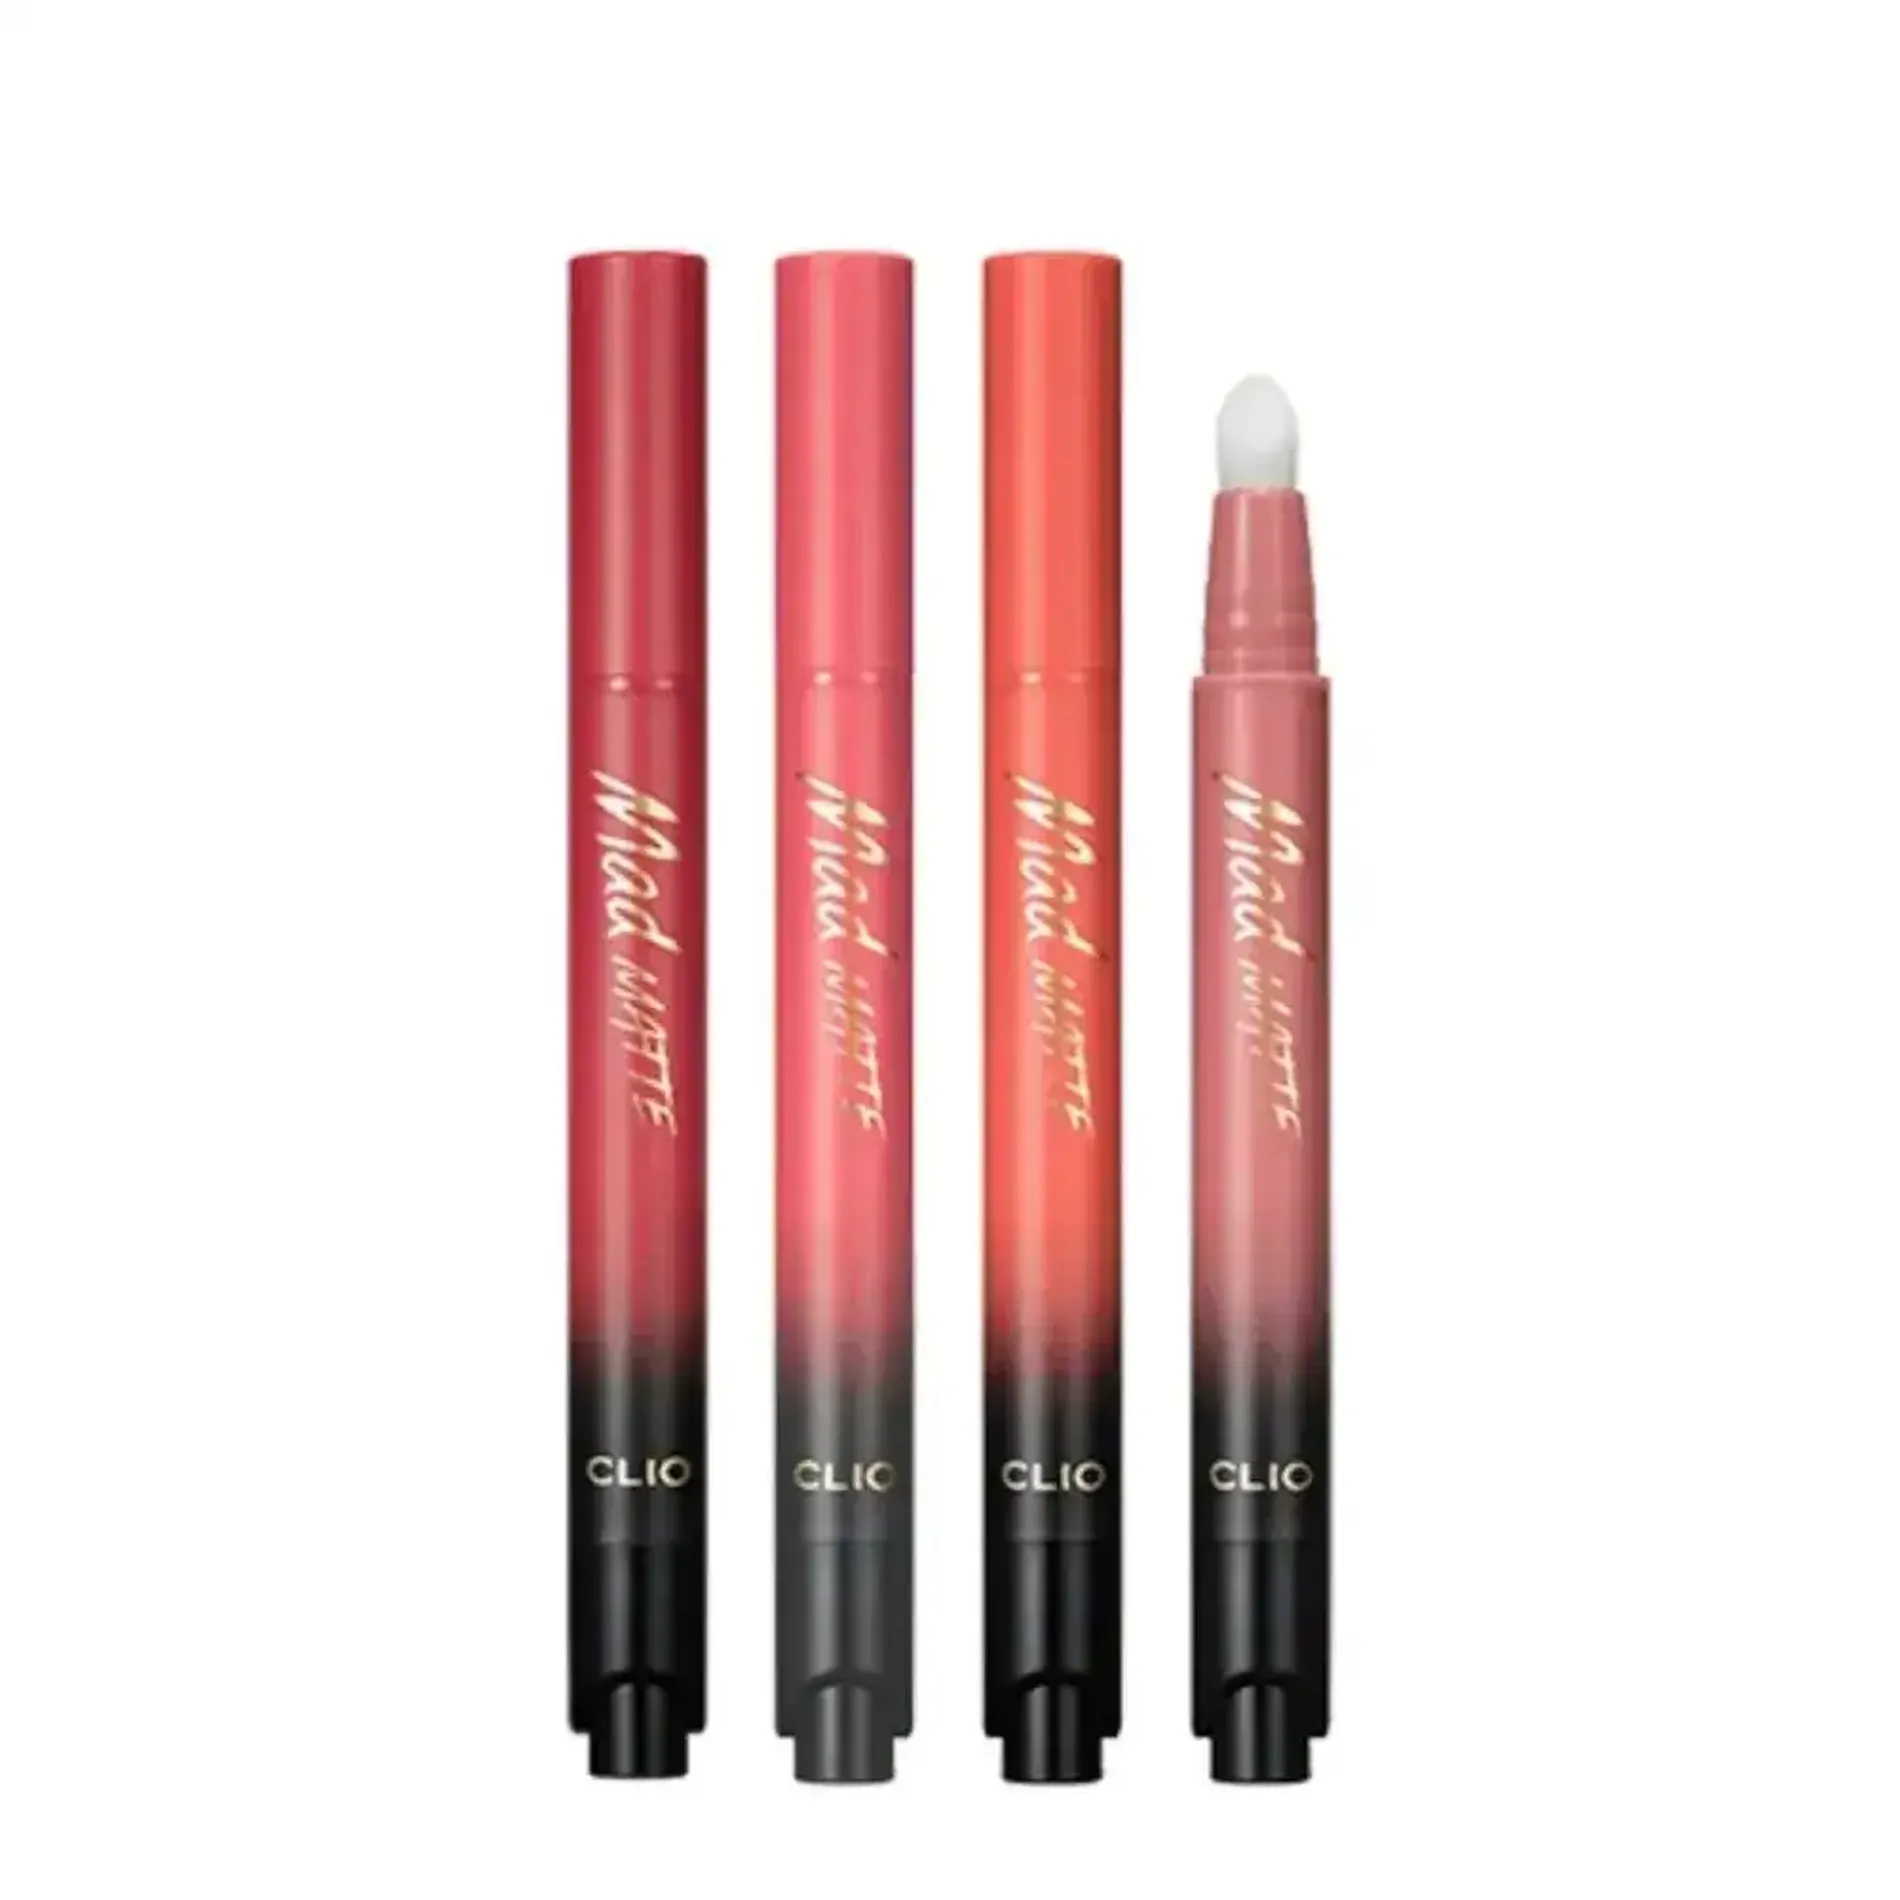 son-nuoc-dang-bam-clio-mad-matte-stain-tint-2g-11